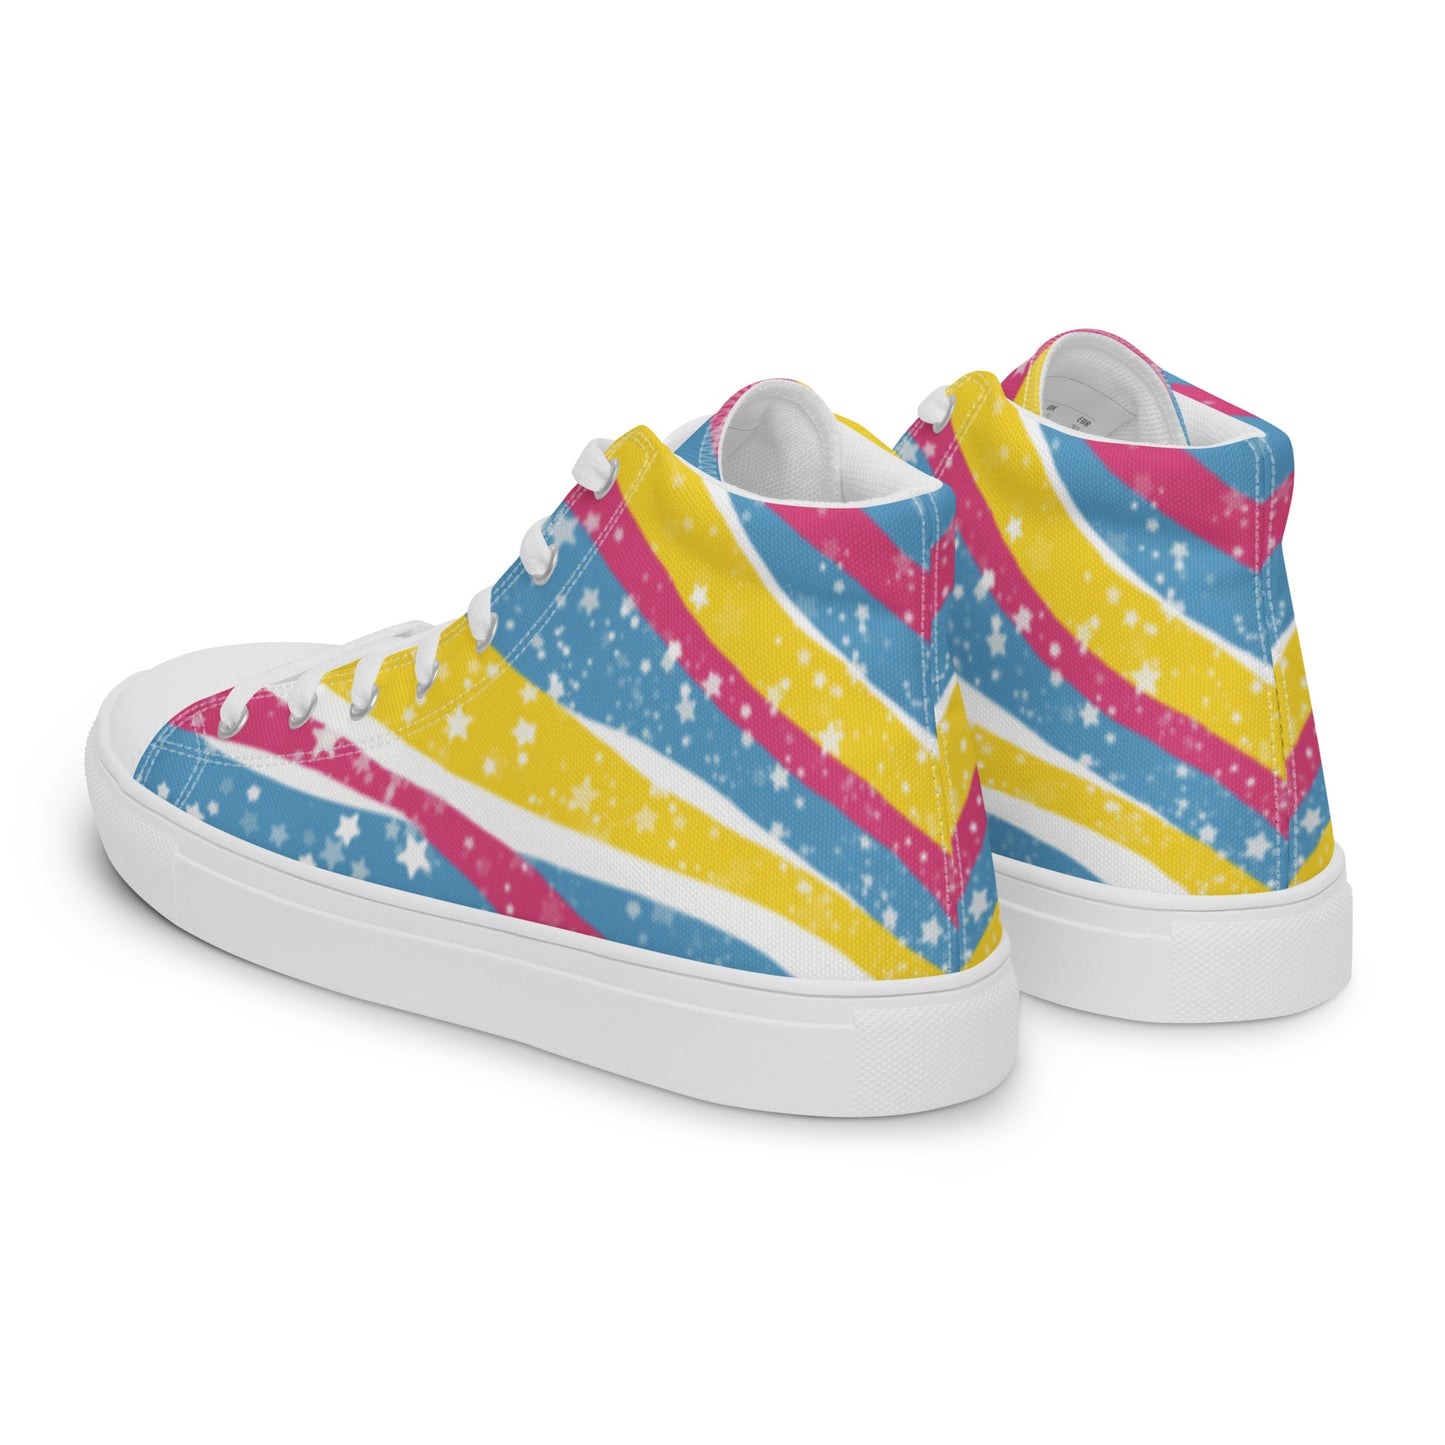 Left back view: a pair of high top shoes with pink, yellow, and blue ribbons that get larger from heel to laces, white stars, and the Aras Sivad logo on the tongue.